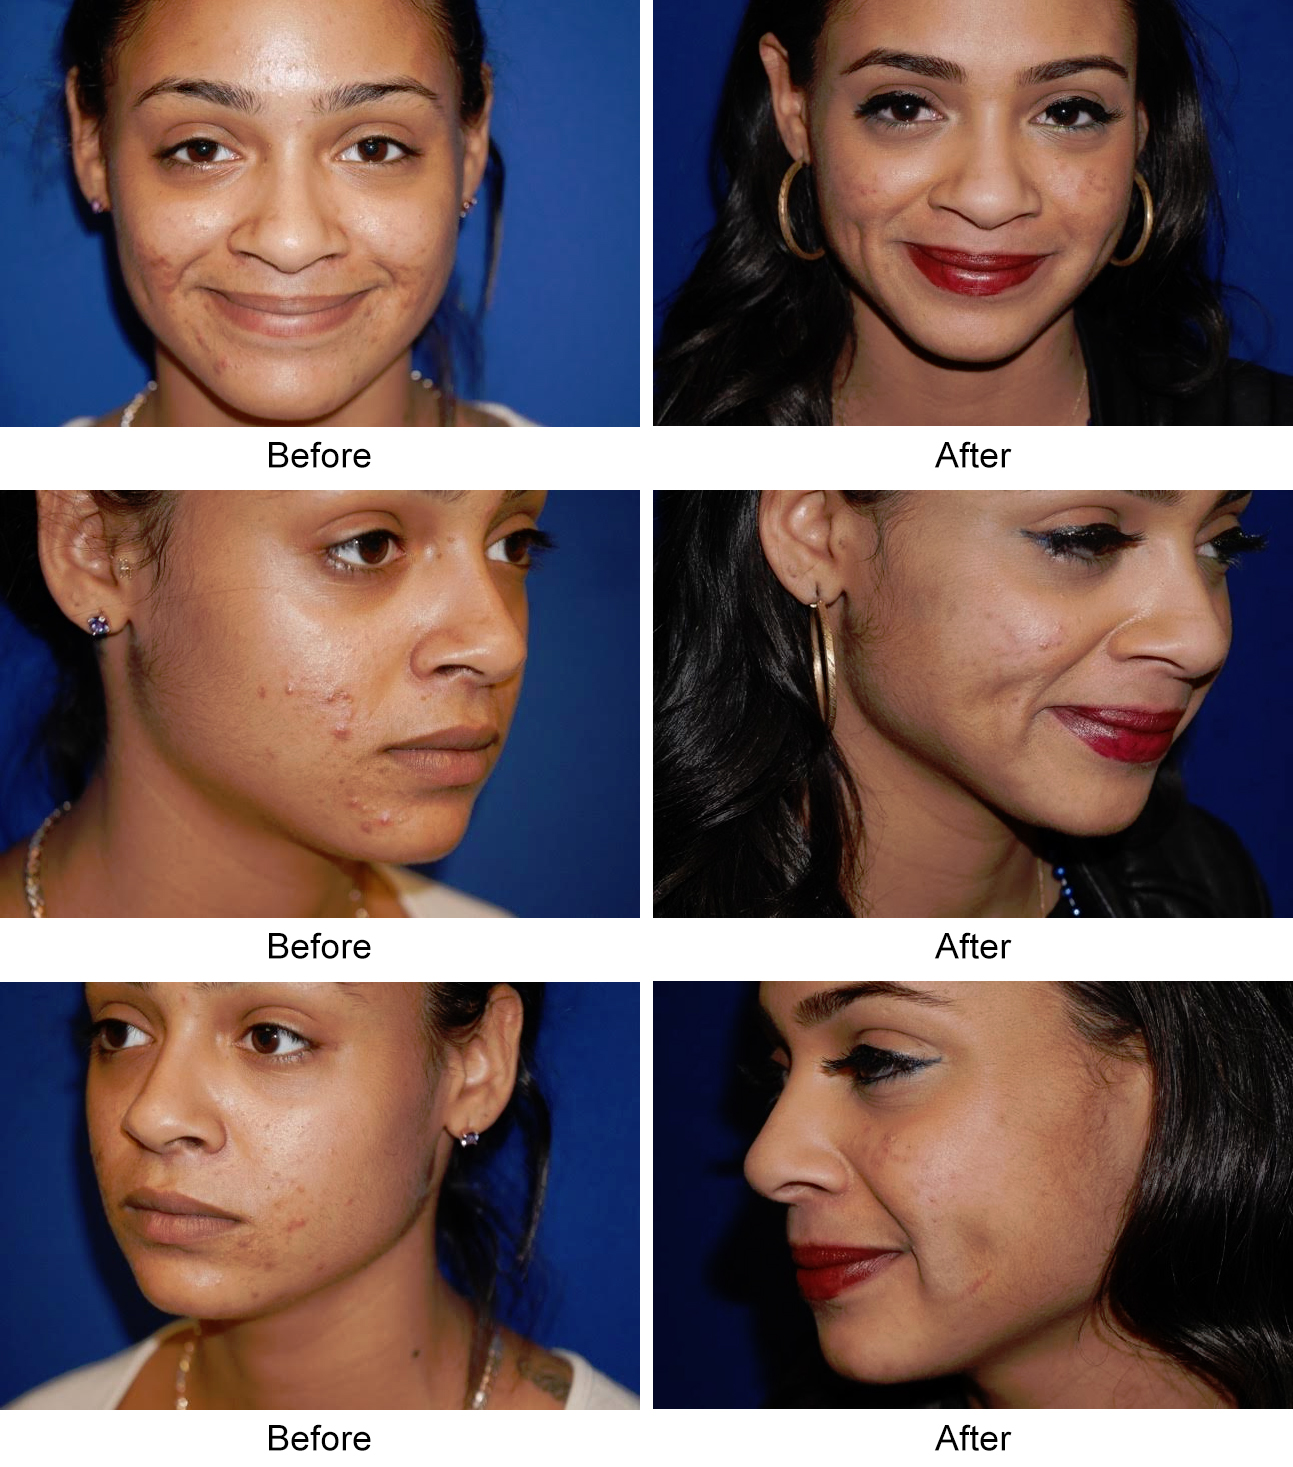 dermatology and surgery associates dimple surgery before and after bronx ny